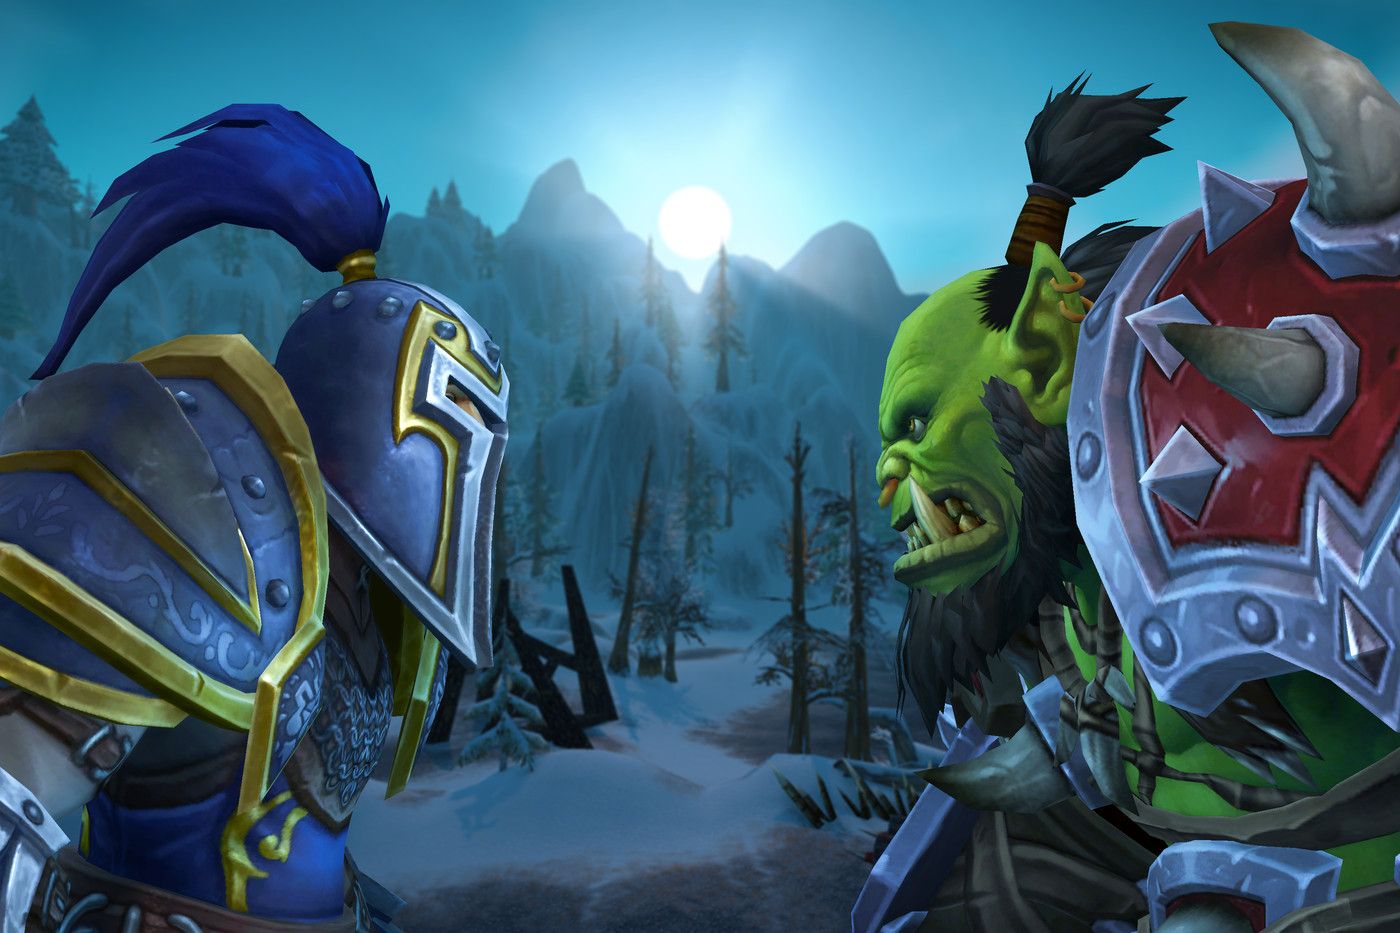 New World of Warcraft Warbands feature is a godsend for alts